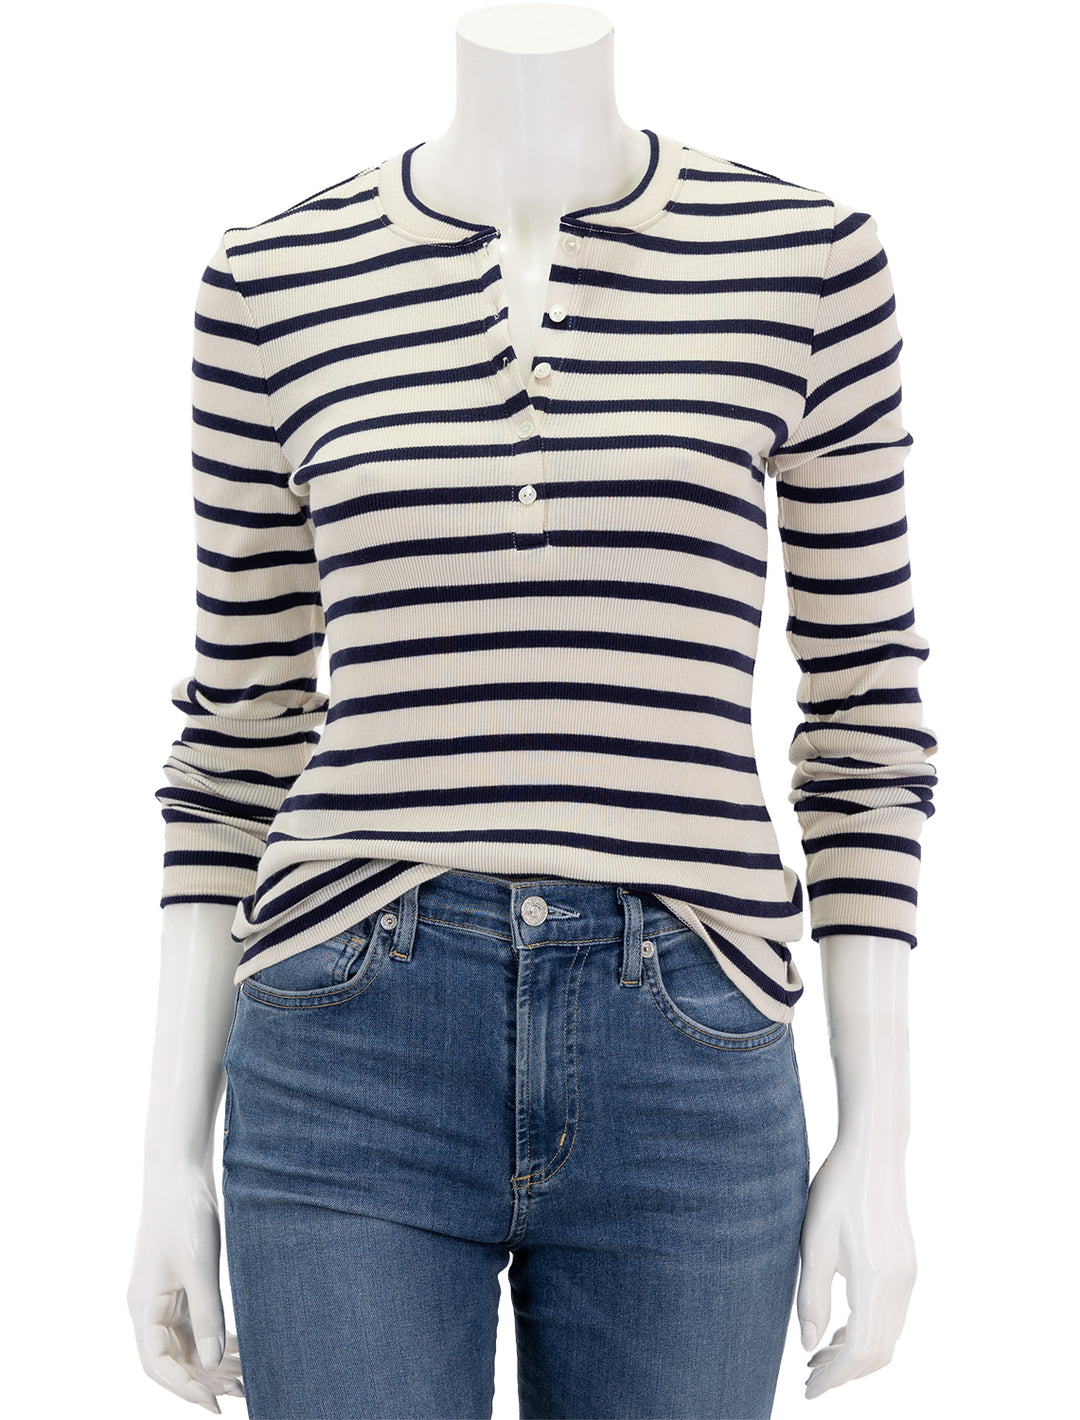 Front view of Nili Lotan's jordan henley tee in ivory and navy stripe.